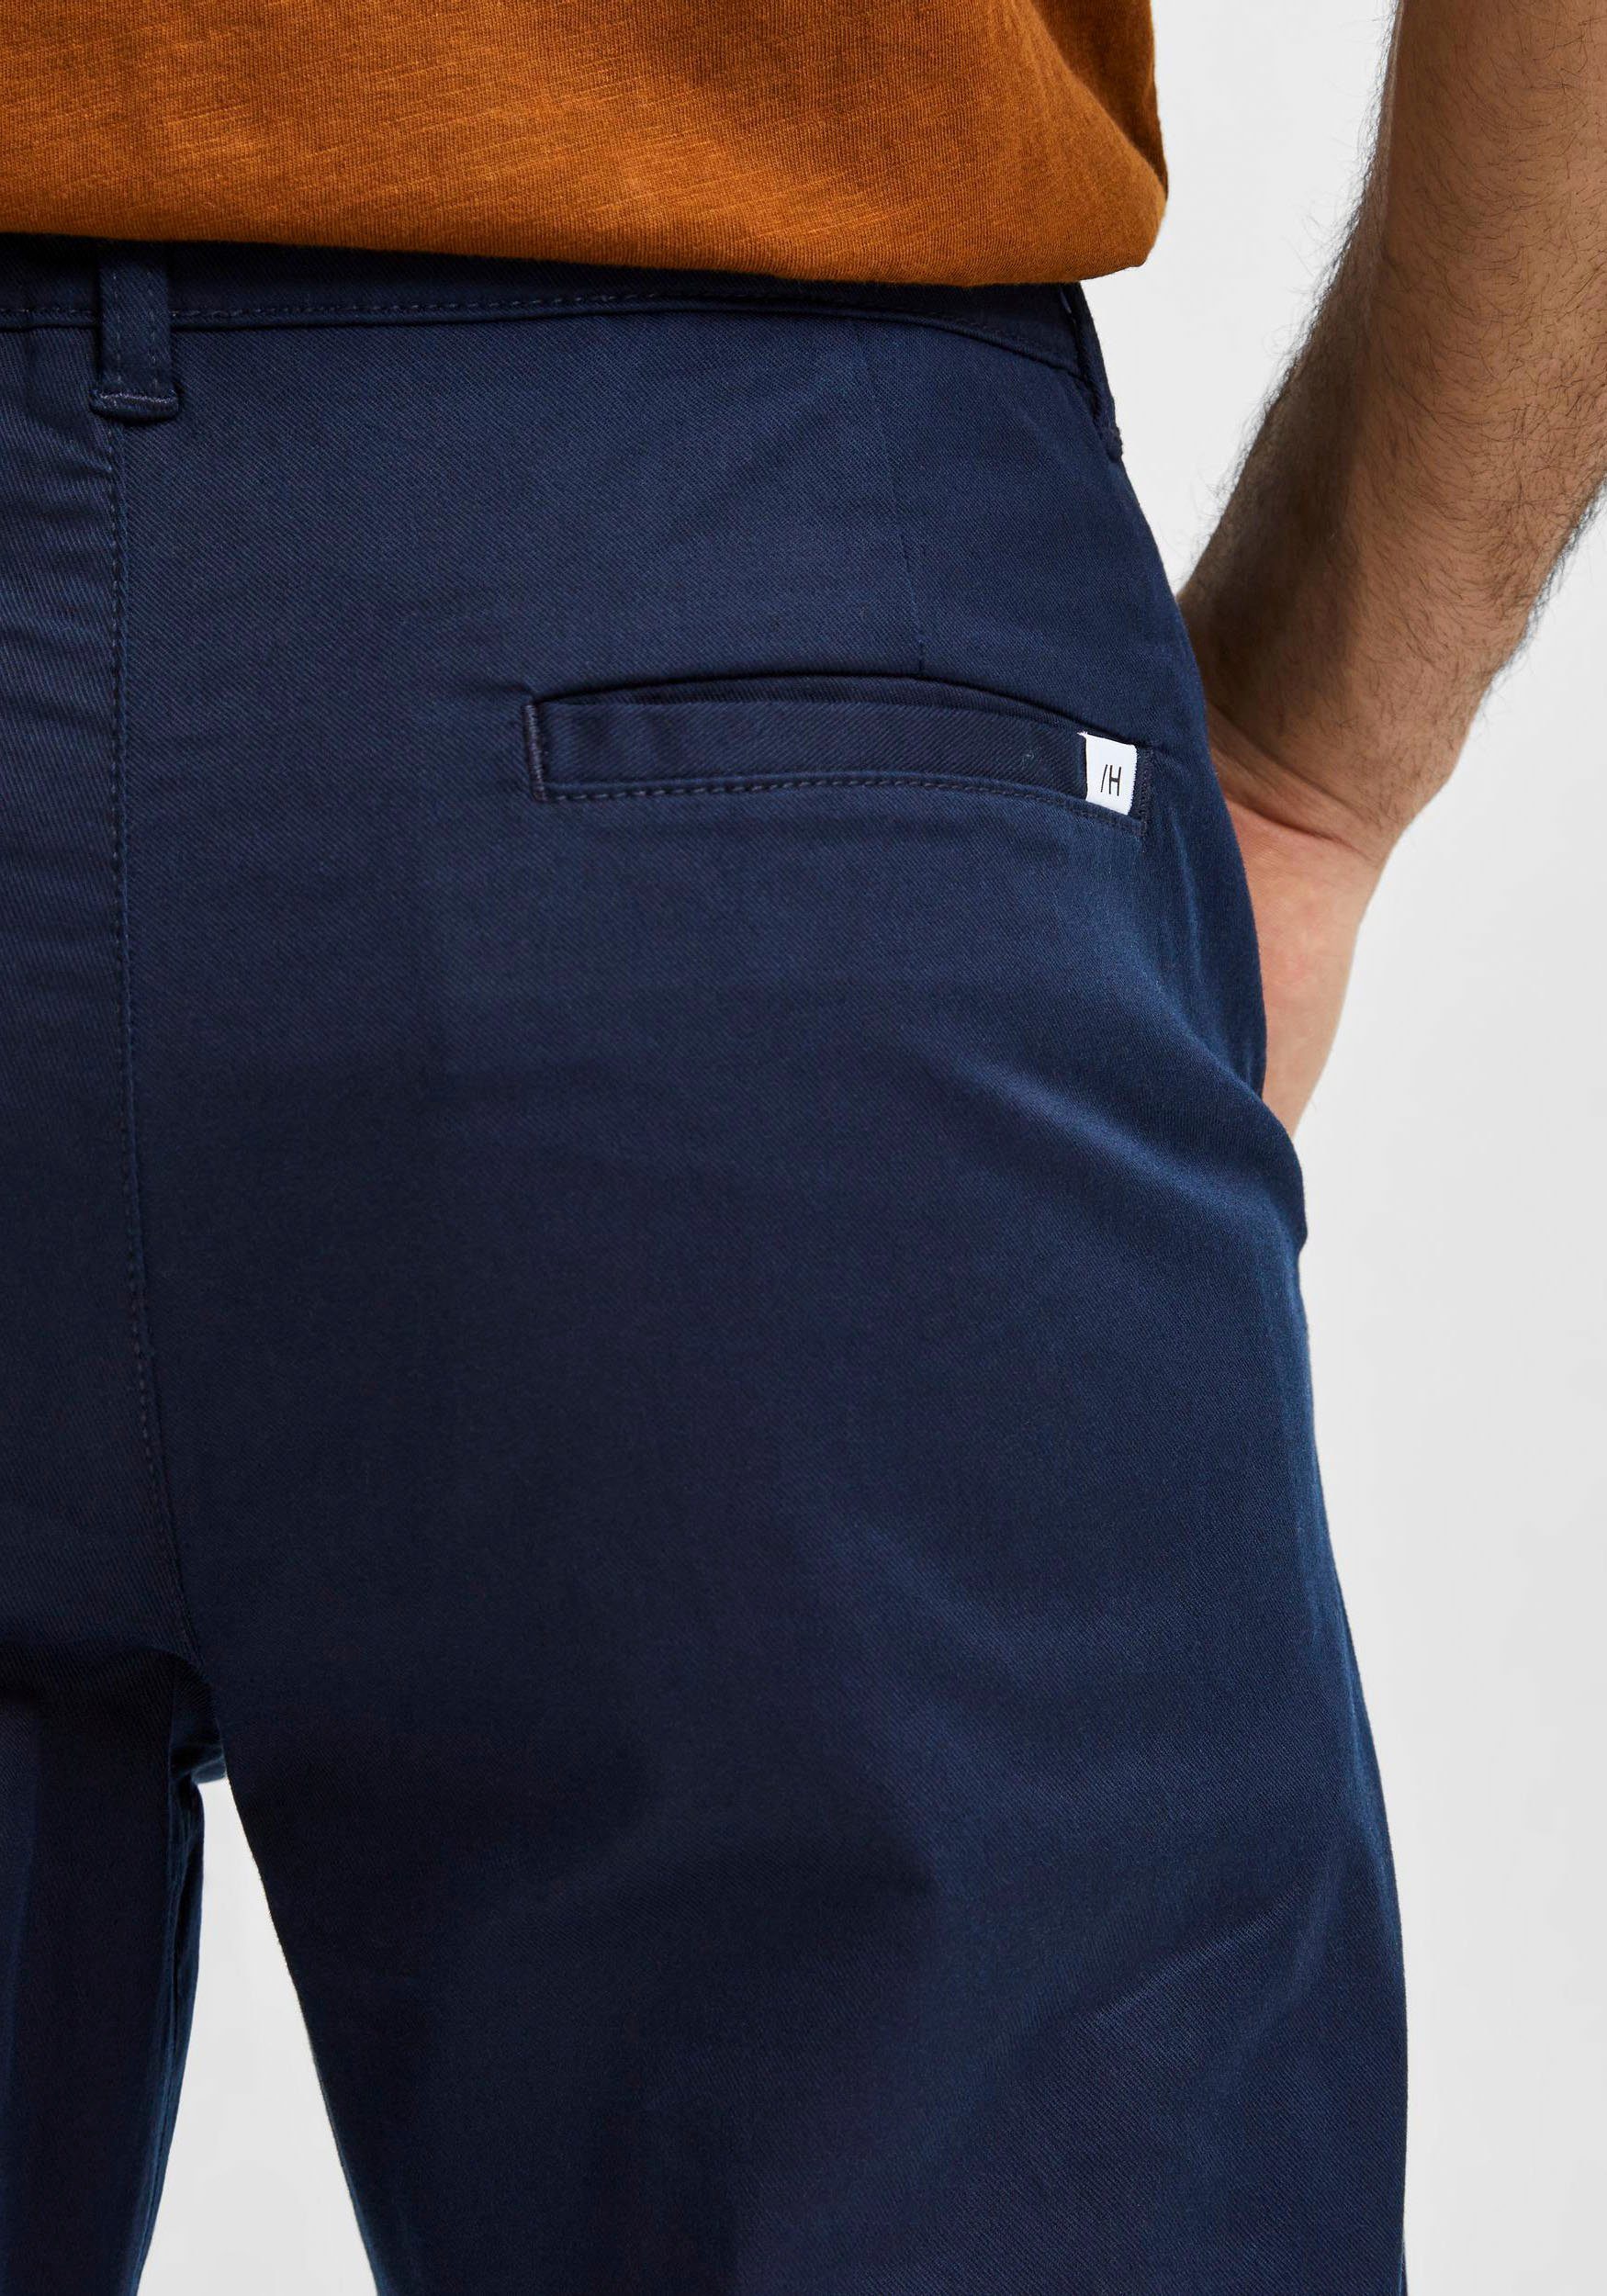 Sapphire SELECTED SE HOMME Chinohose Dark Chino